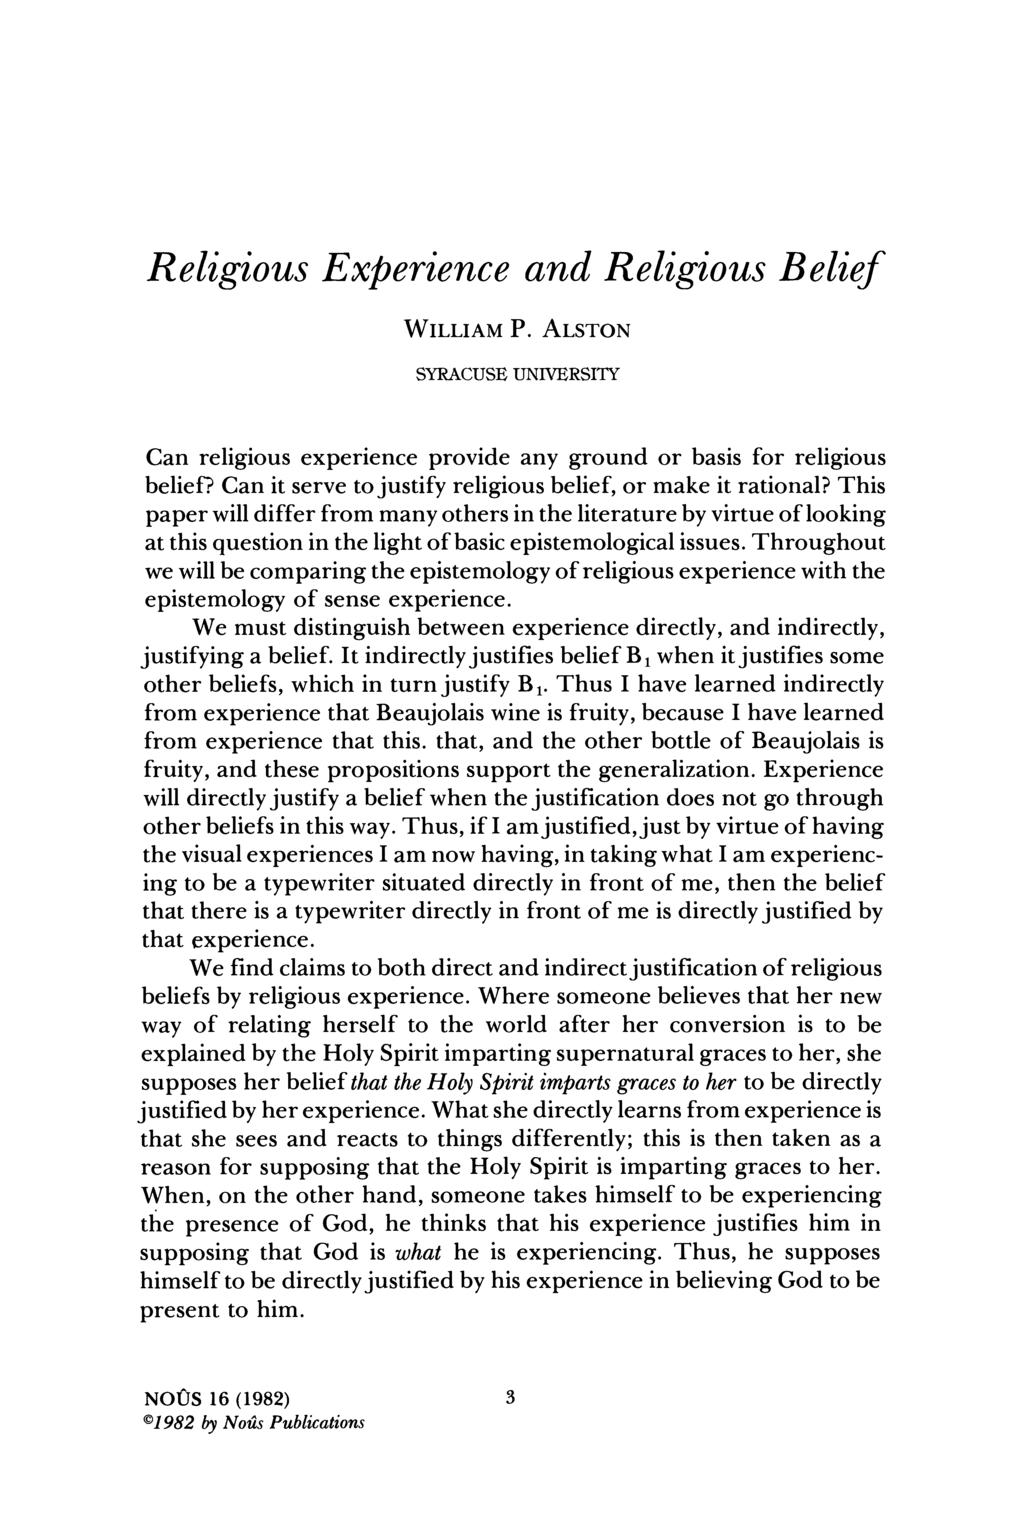 Religious Experience and Religious Belief WILLIAM P. ALSTON SYRACUSE UNIVERSITY Can religious experience provide any ground or basis for religious belief?